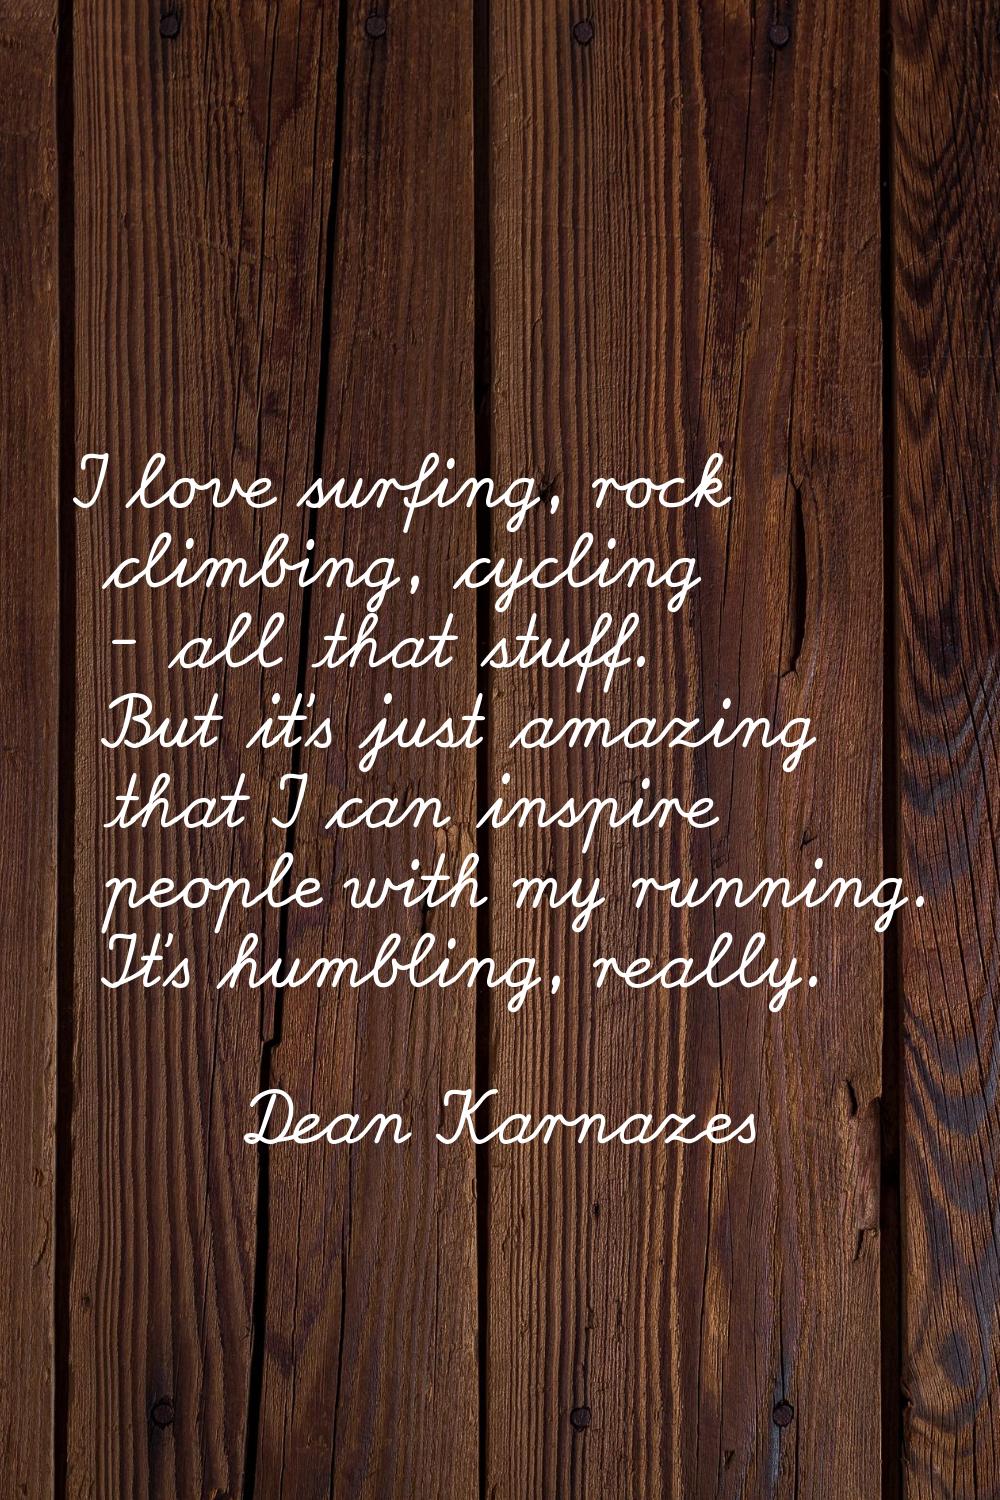 I love surfing, rock climbing, cycling - all that stuff. But it's just amazing that I can inspire p